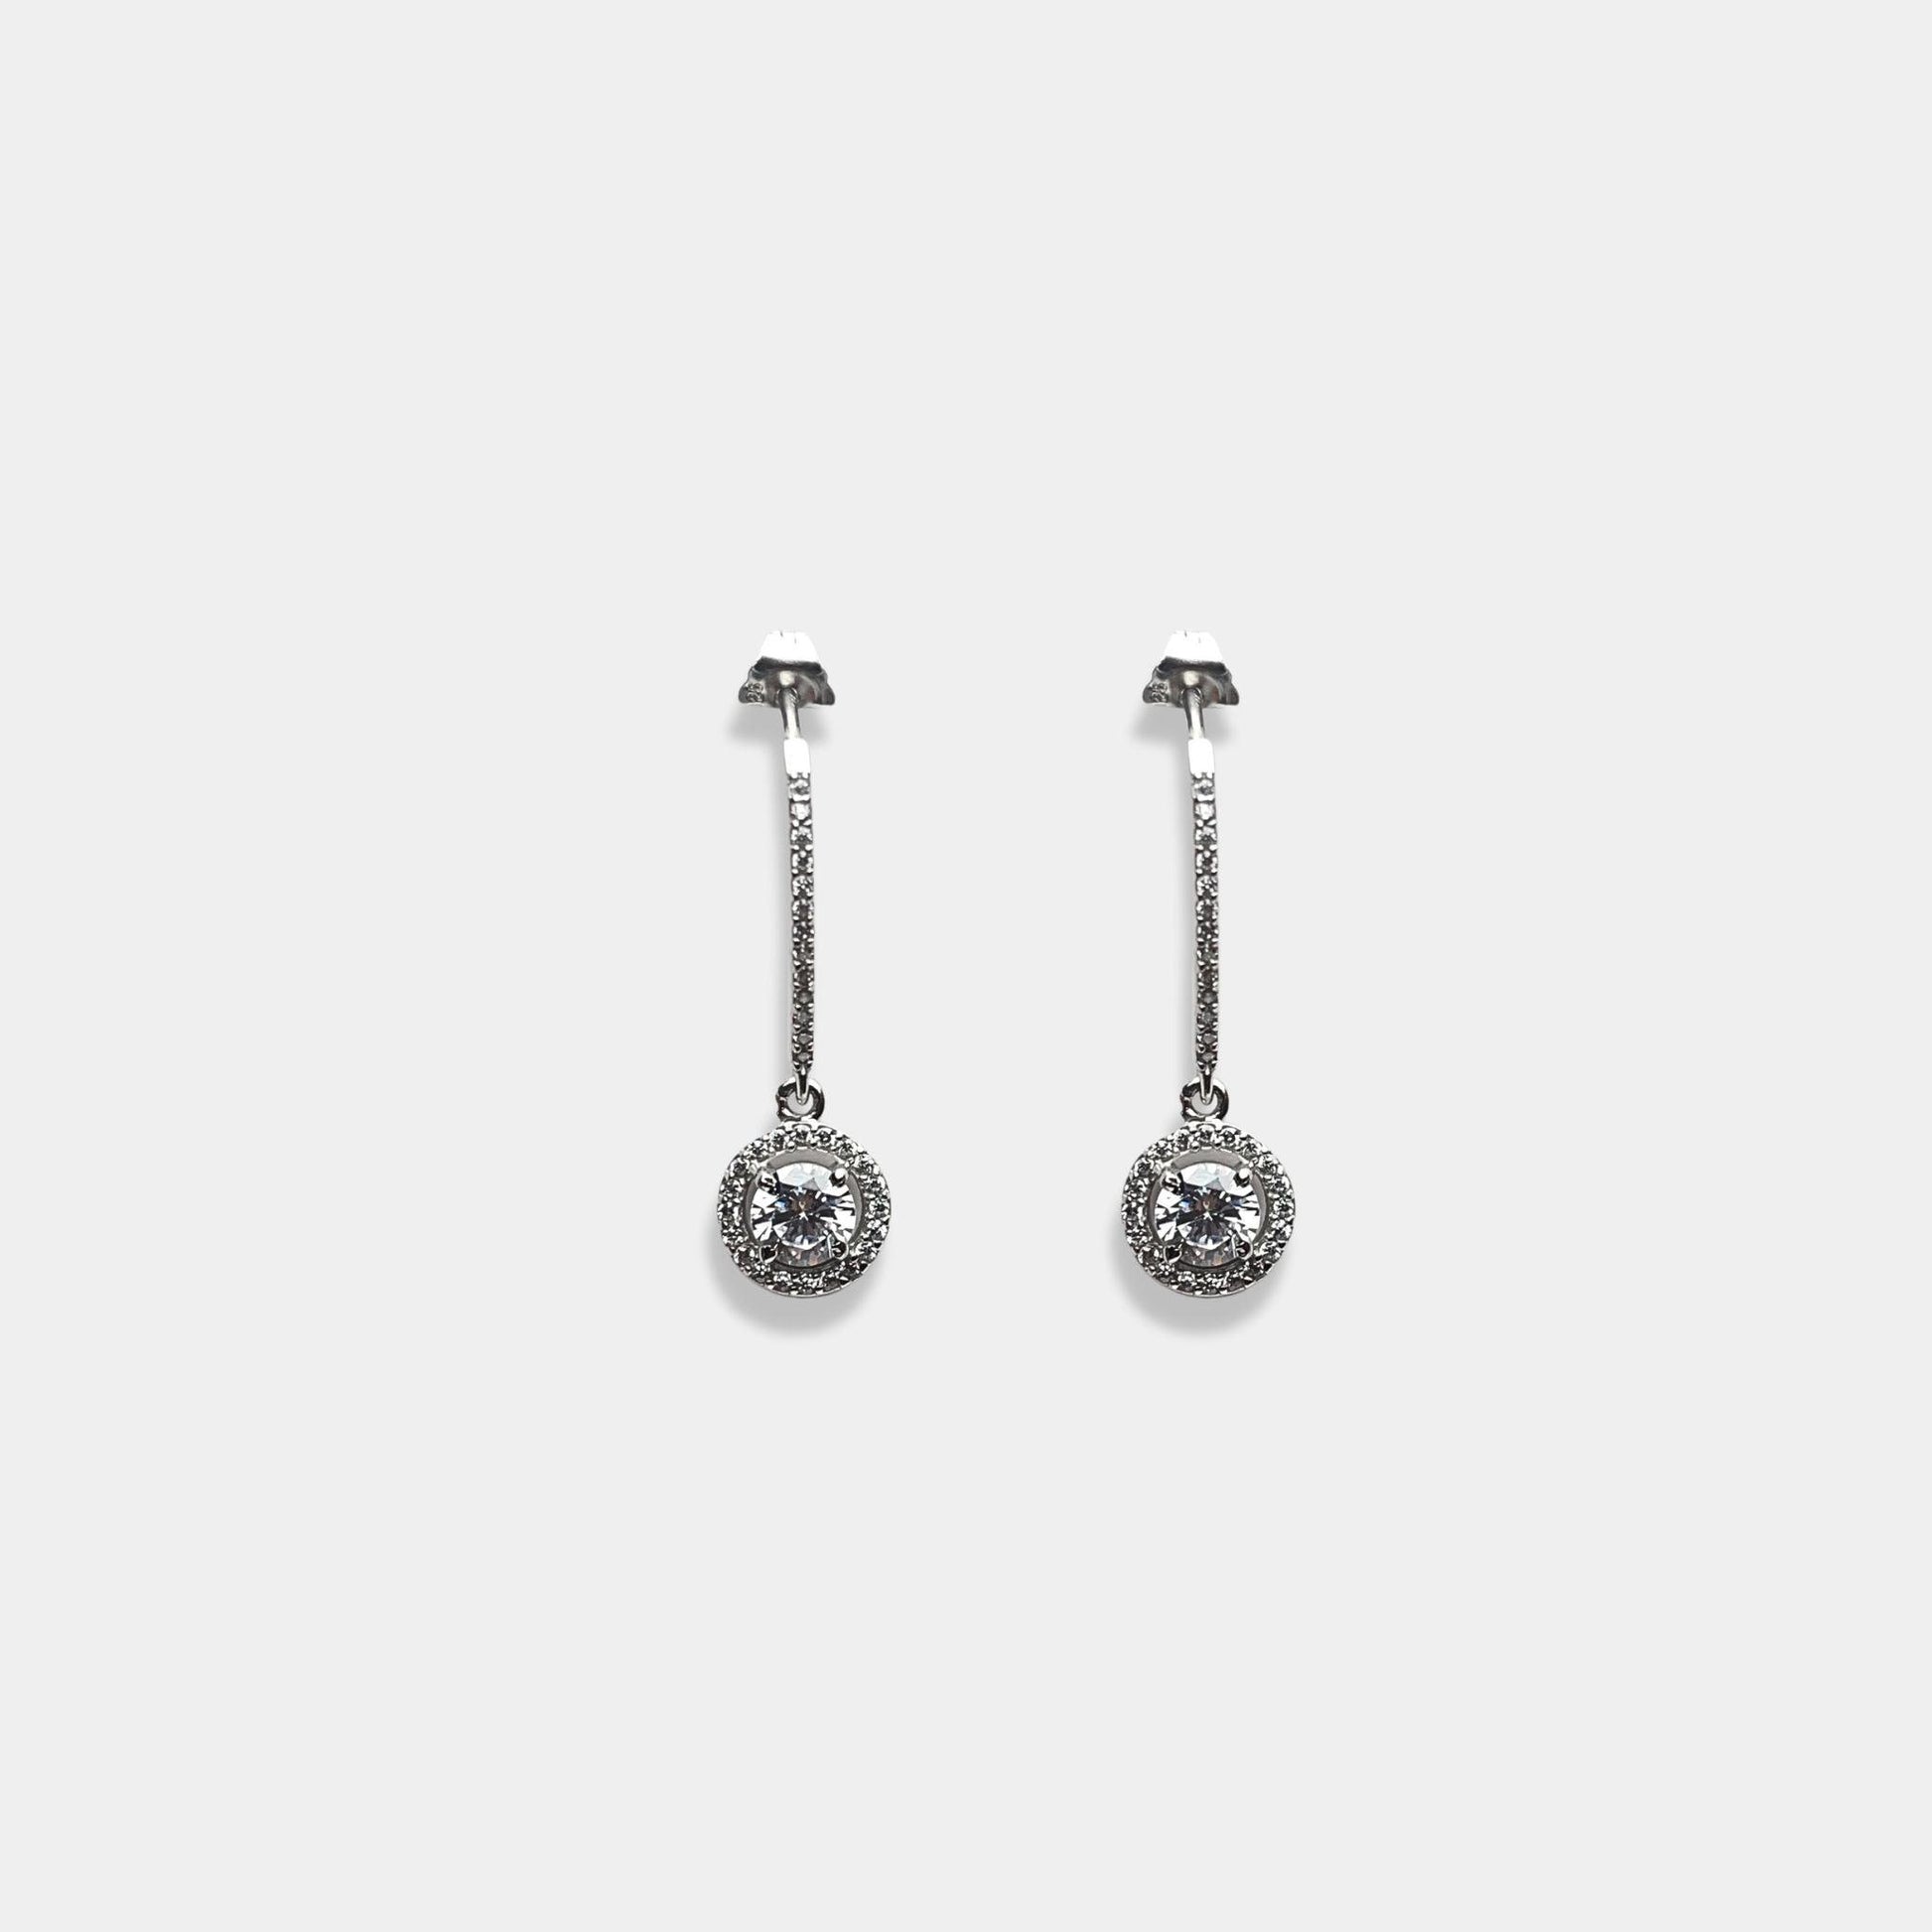 silver earrings, crafted from sterling silver